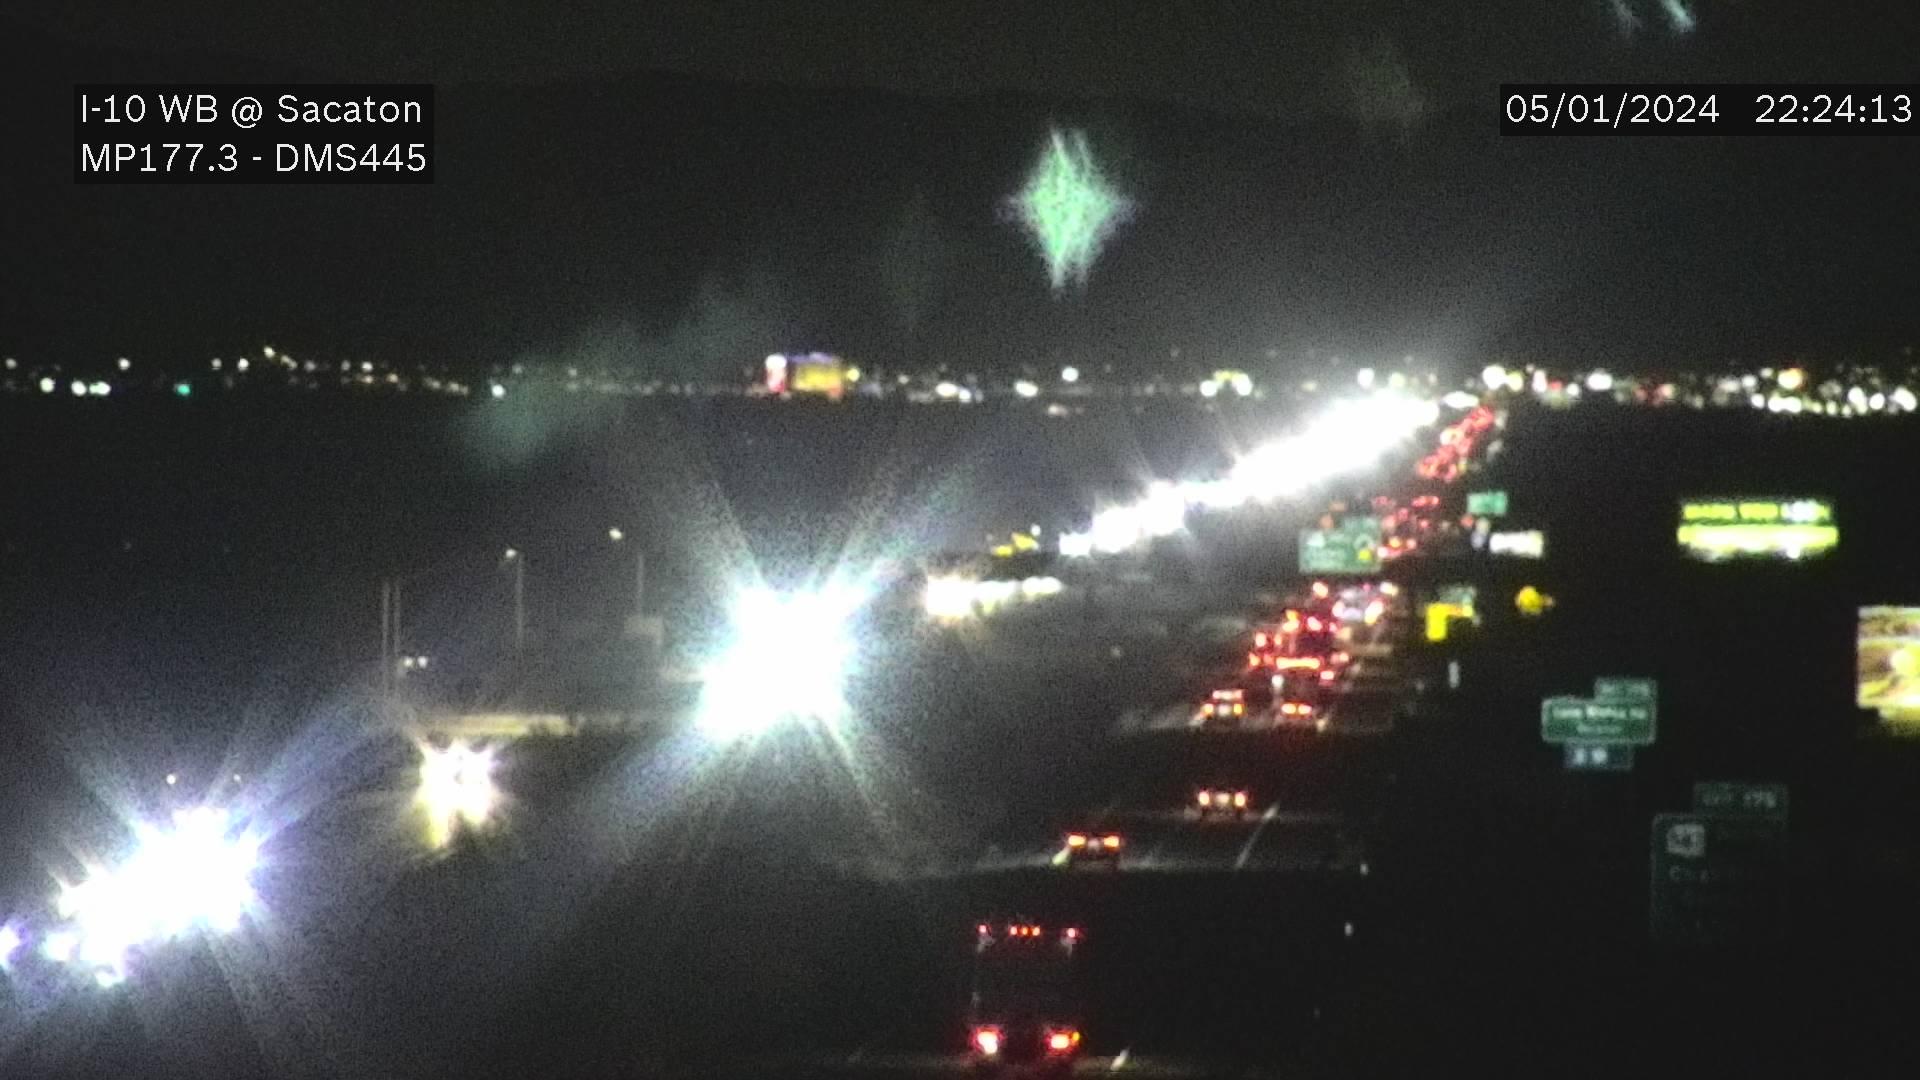 Sweetwater › West: I-10 WB 177.30 @Sacaton Traffic Camera